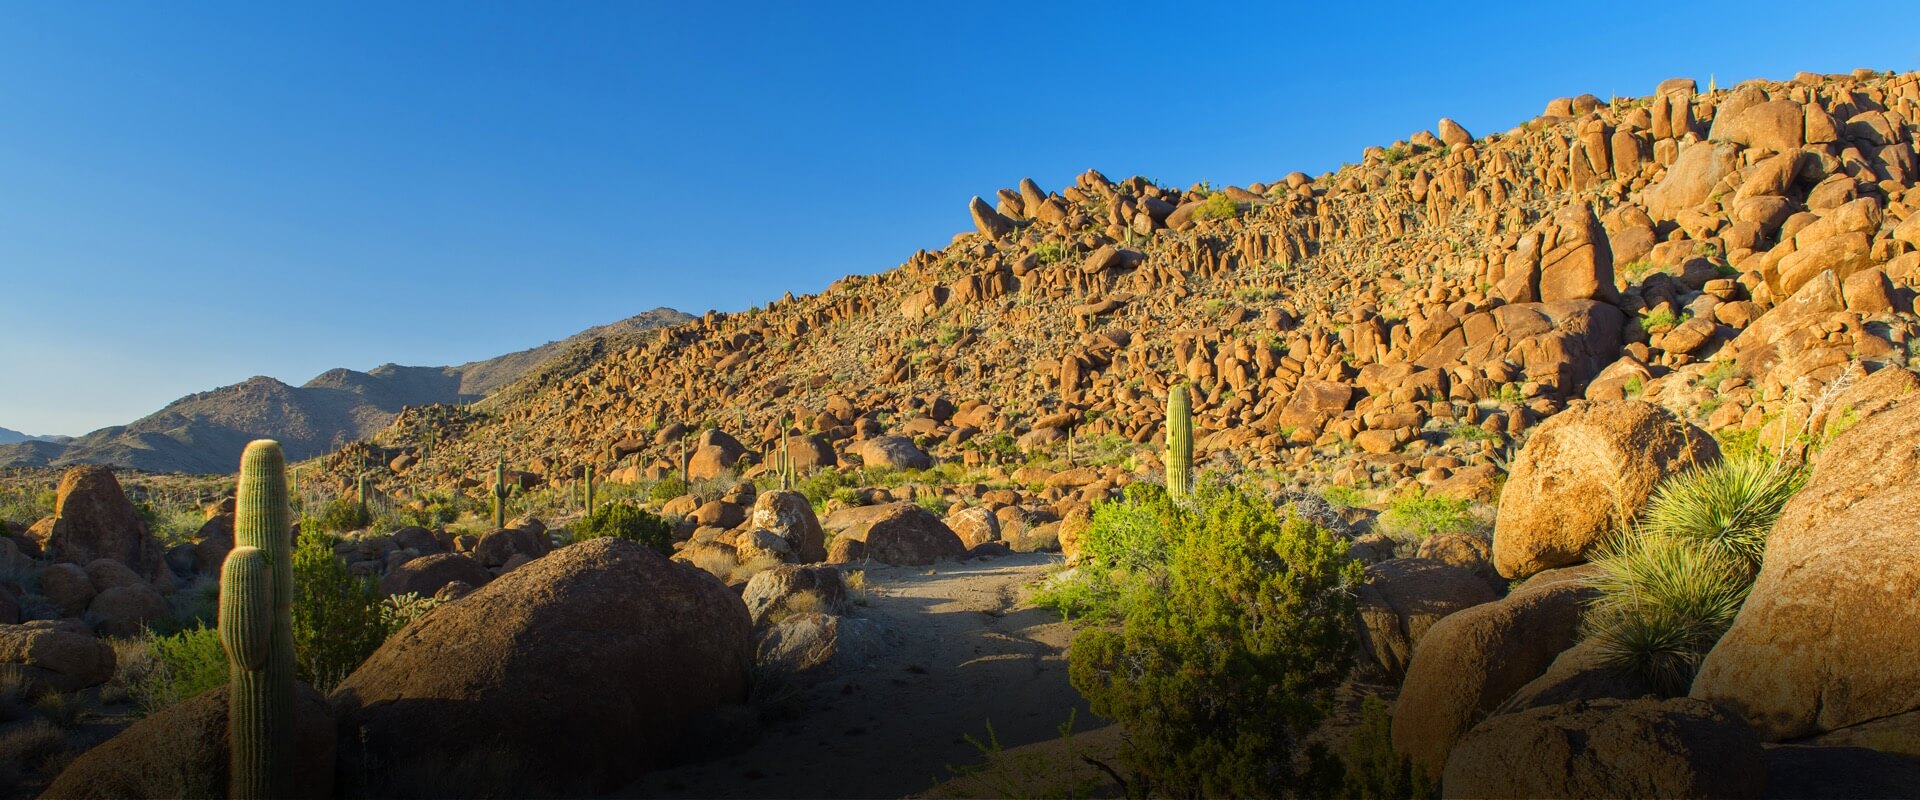 Landscape of northwest Arizona ranch featuring rock outcroppings and cacti